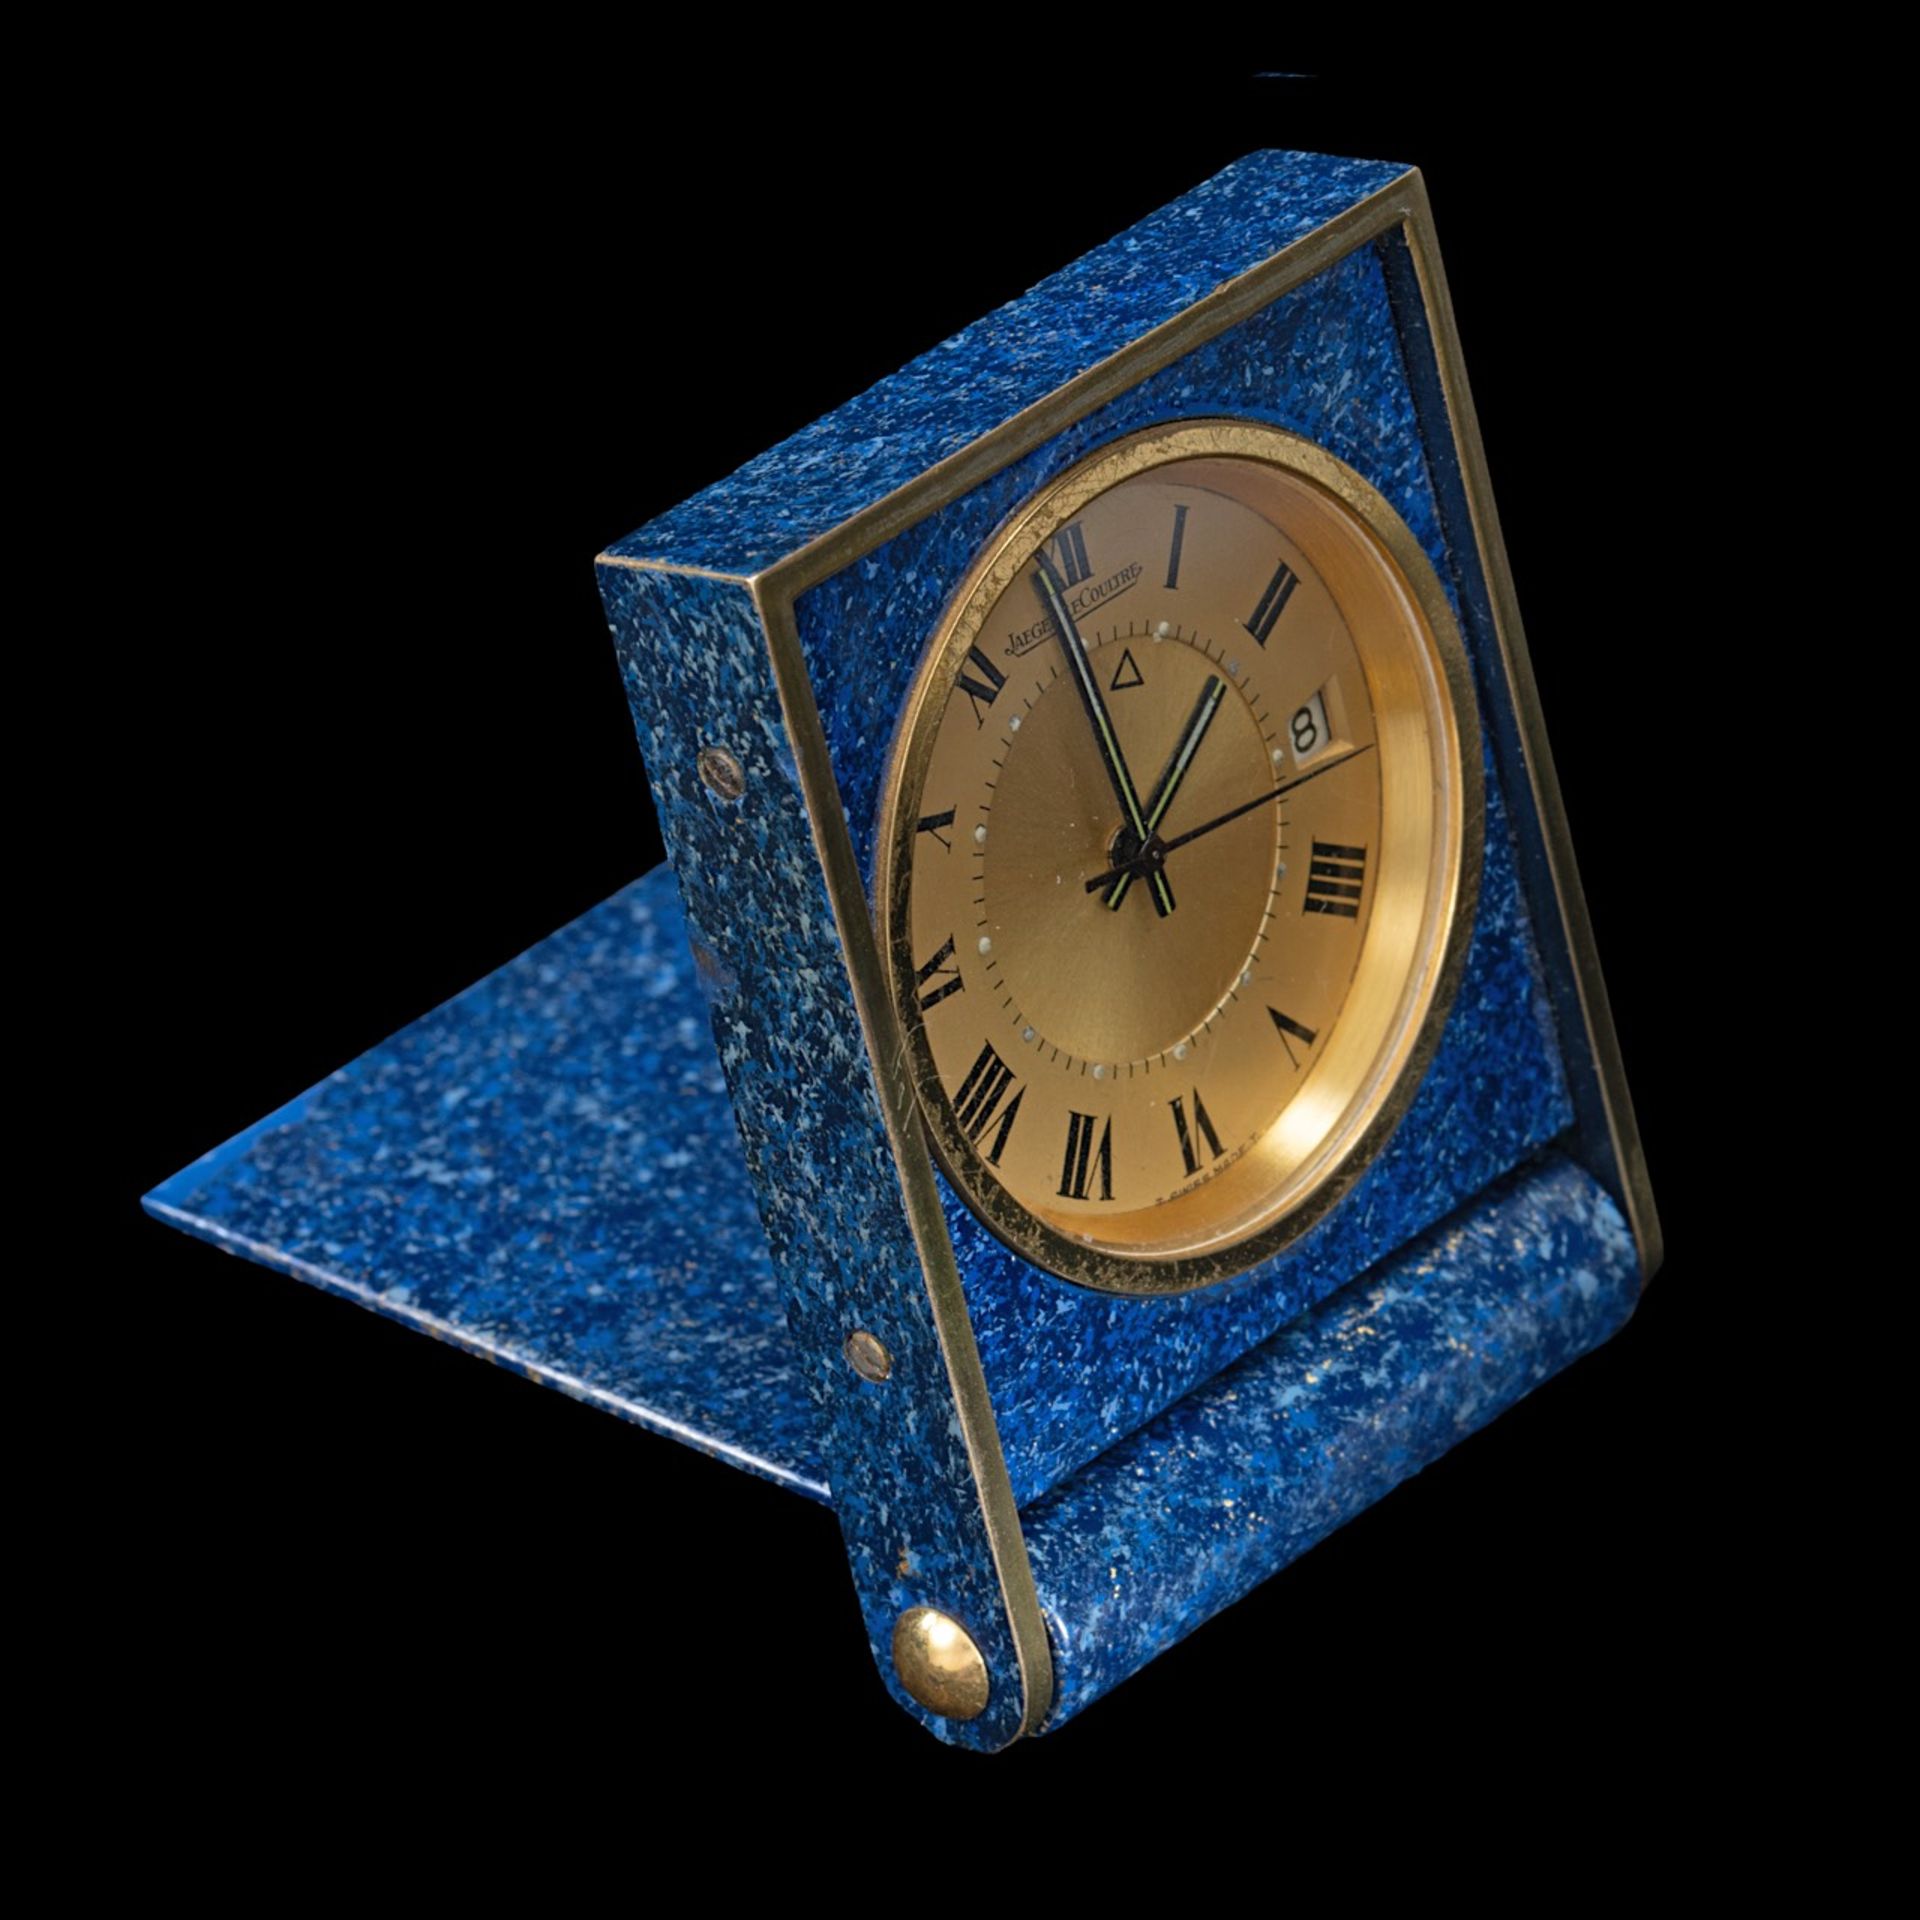 A Jaeger-LeCoultre folding travel alarm clock, W 4,3 - H 5,2 - total thickness 1,3 cm - Image 2 of 6